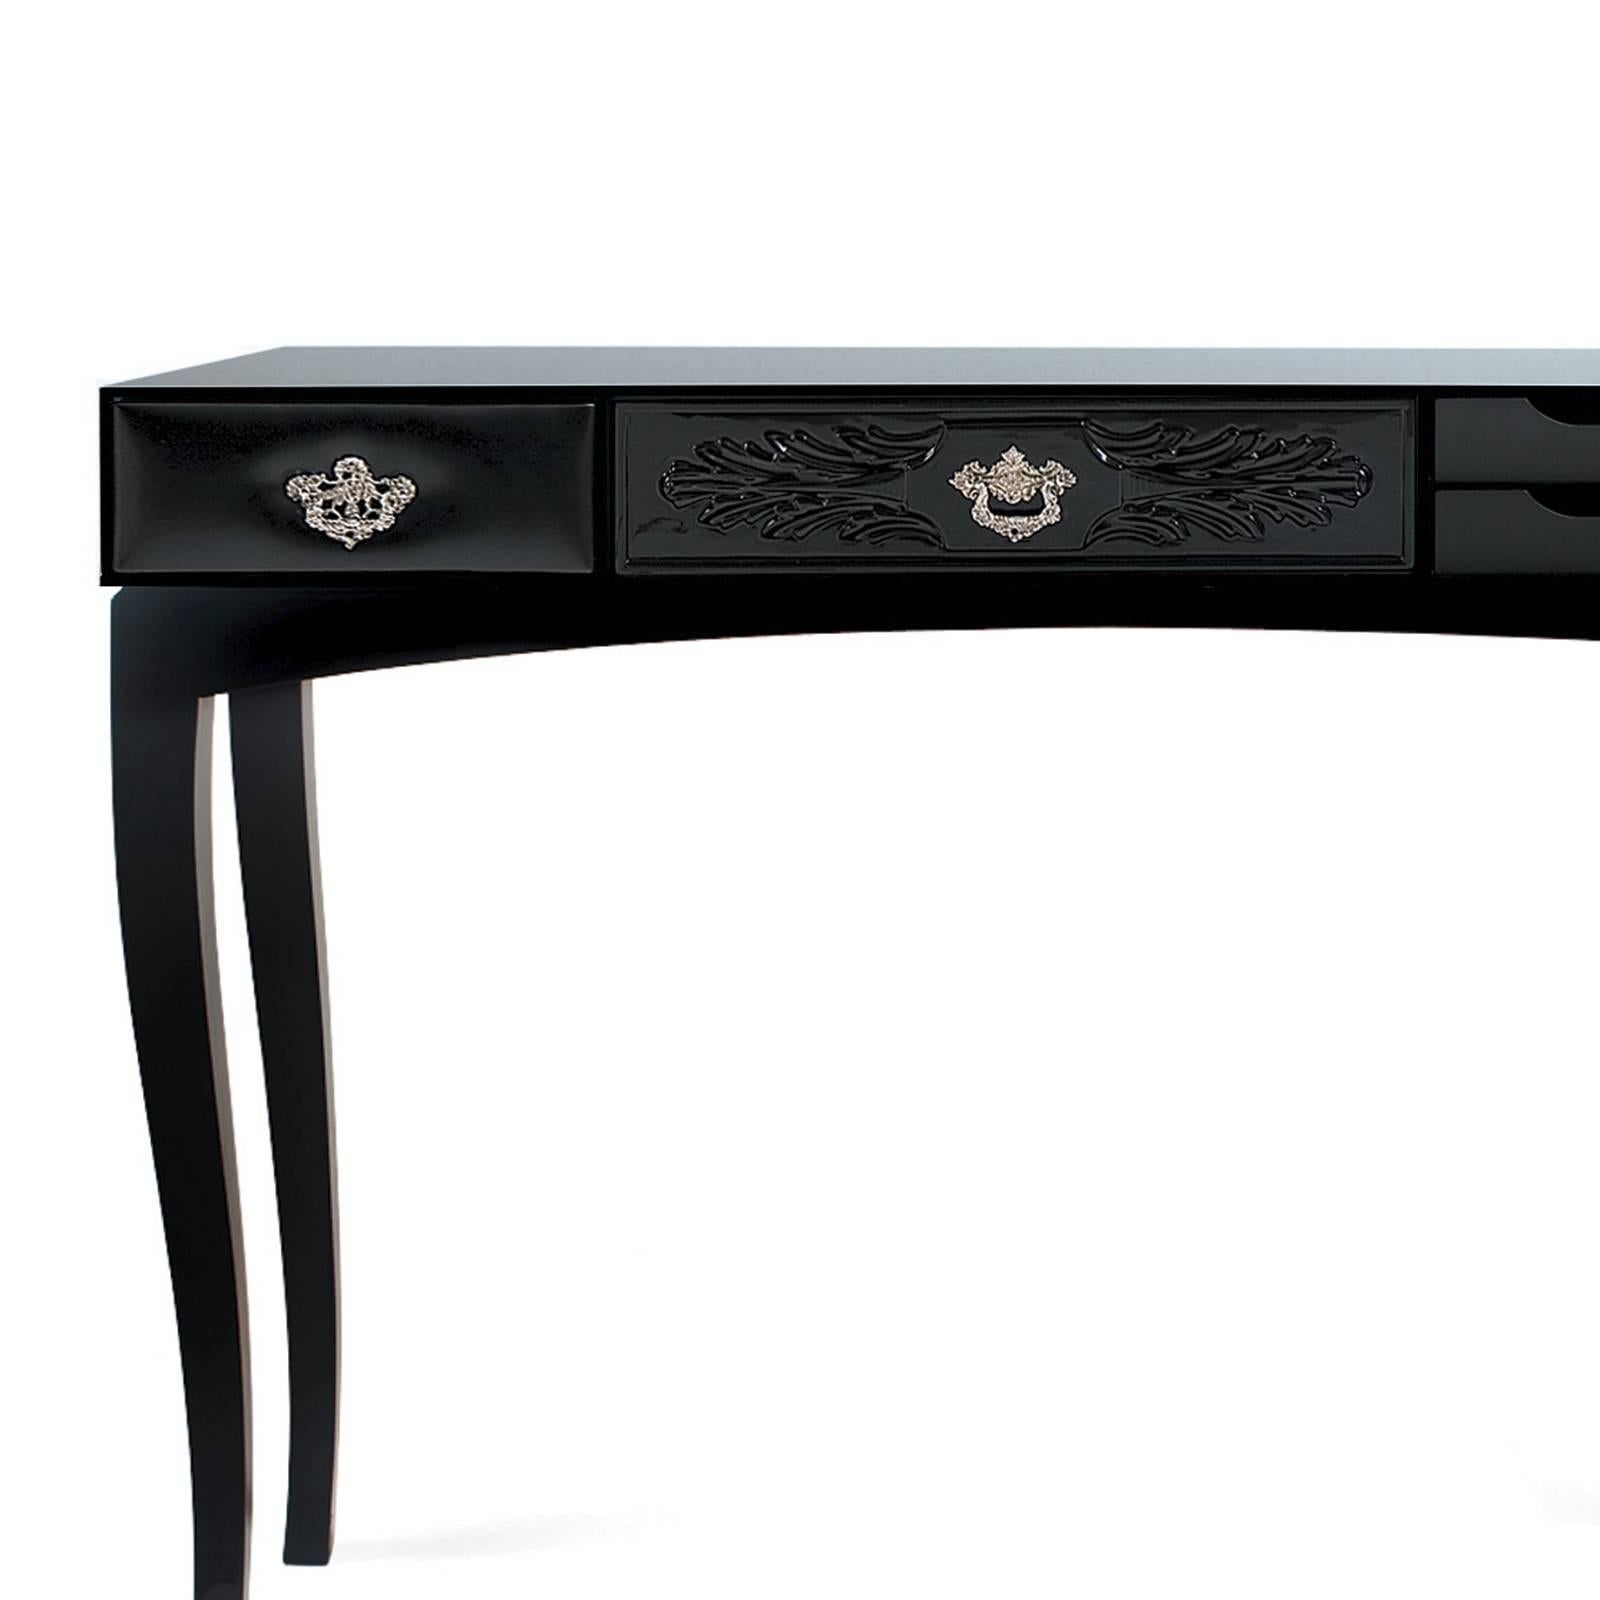 Console black finishes made with rosewood and
with lacquered top. With five drawers. With brass handles.
Available in:
L 118 x D 43 x H 87cm, price: 7600,00€.
L 105 x D 43 x H 87cm, price: 7500,00€.
L 90 x D 43 x H 87cm, price: 7400,00€.
L 85 x D 43